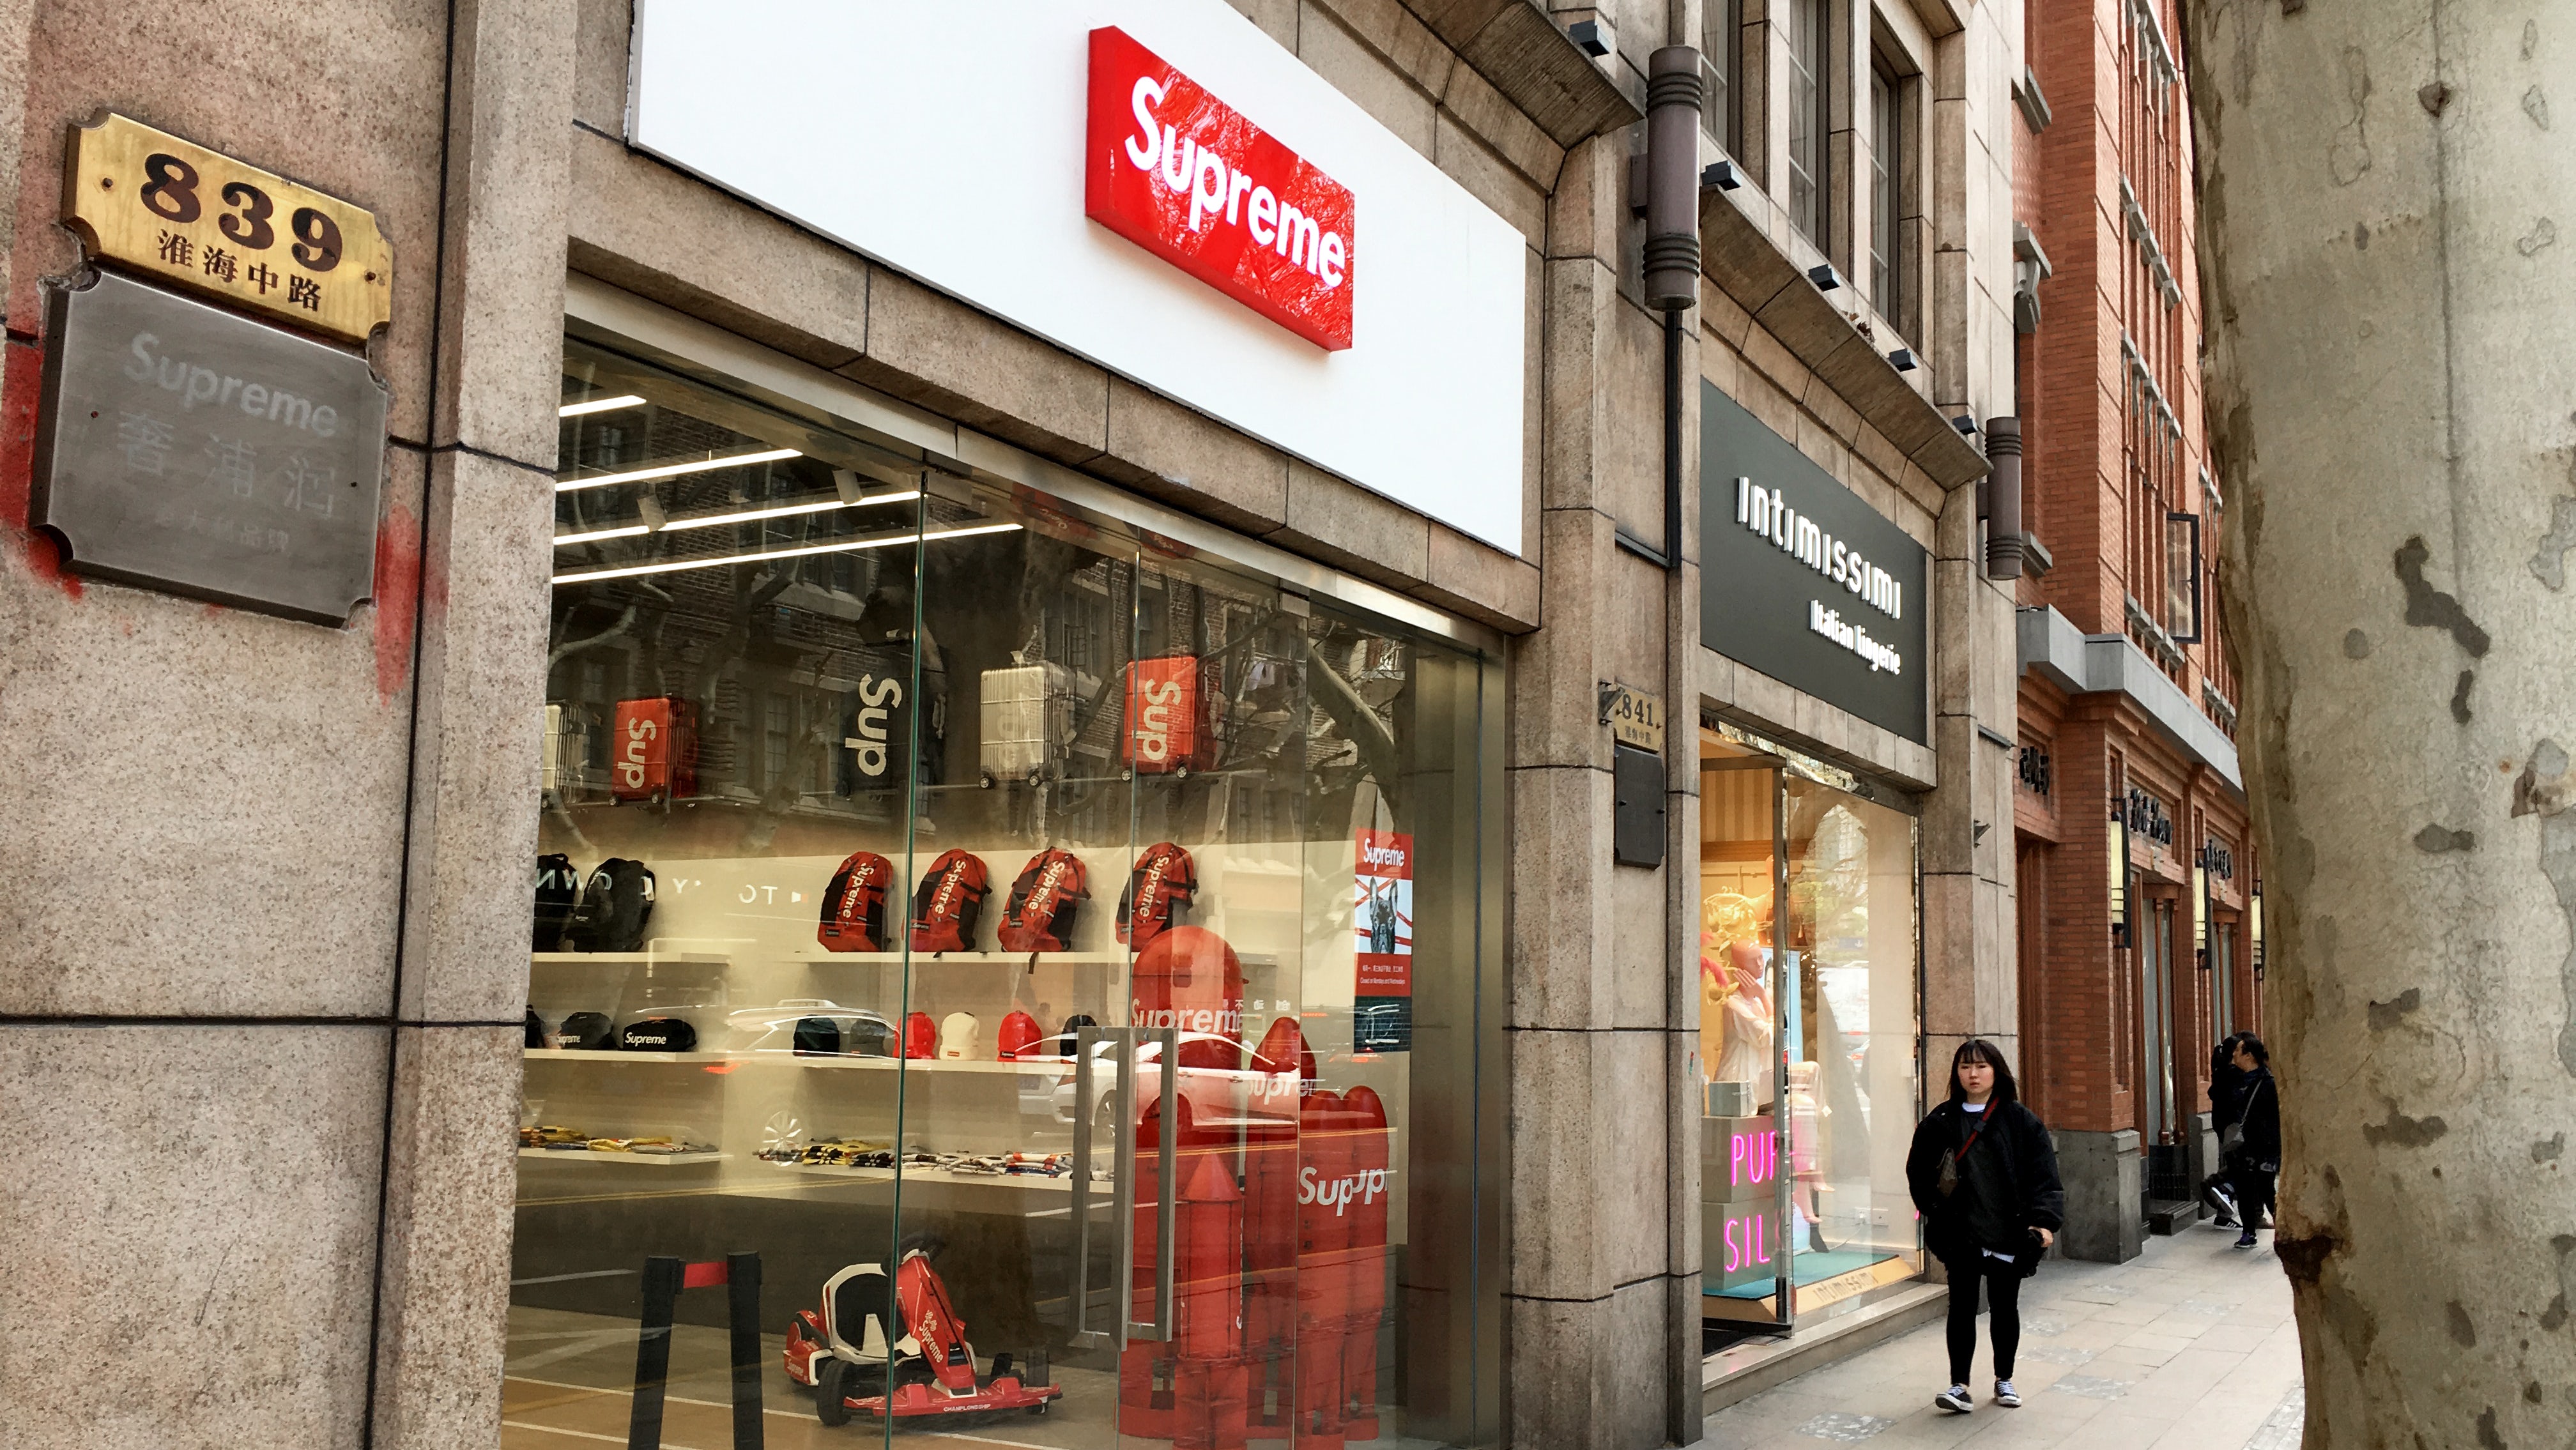 Supreme vs. Supreme: the story of the legal? fake of the